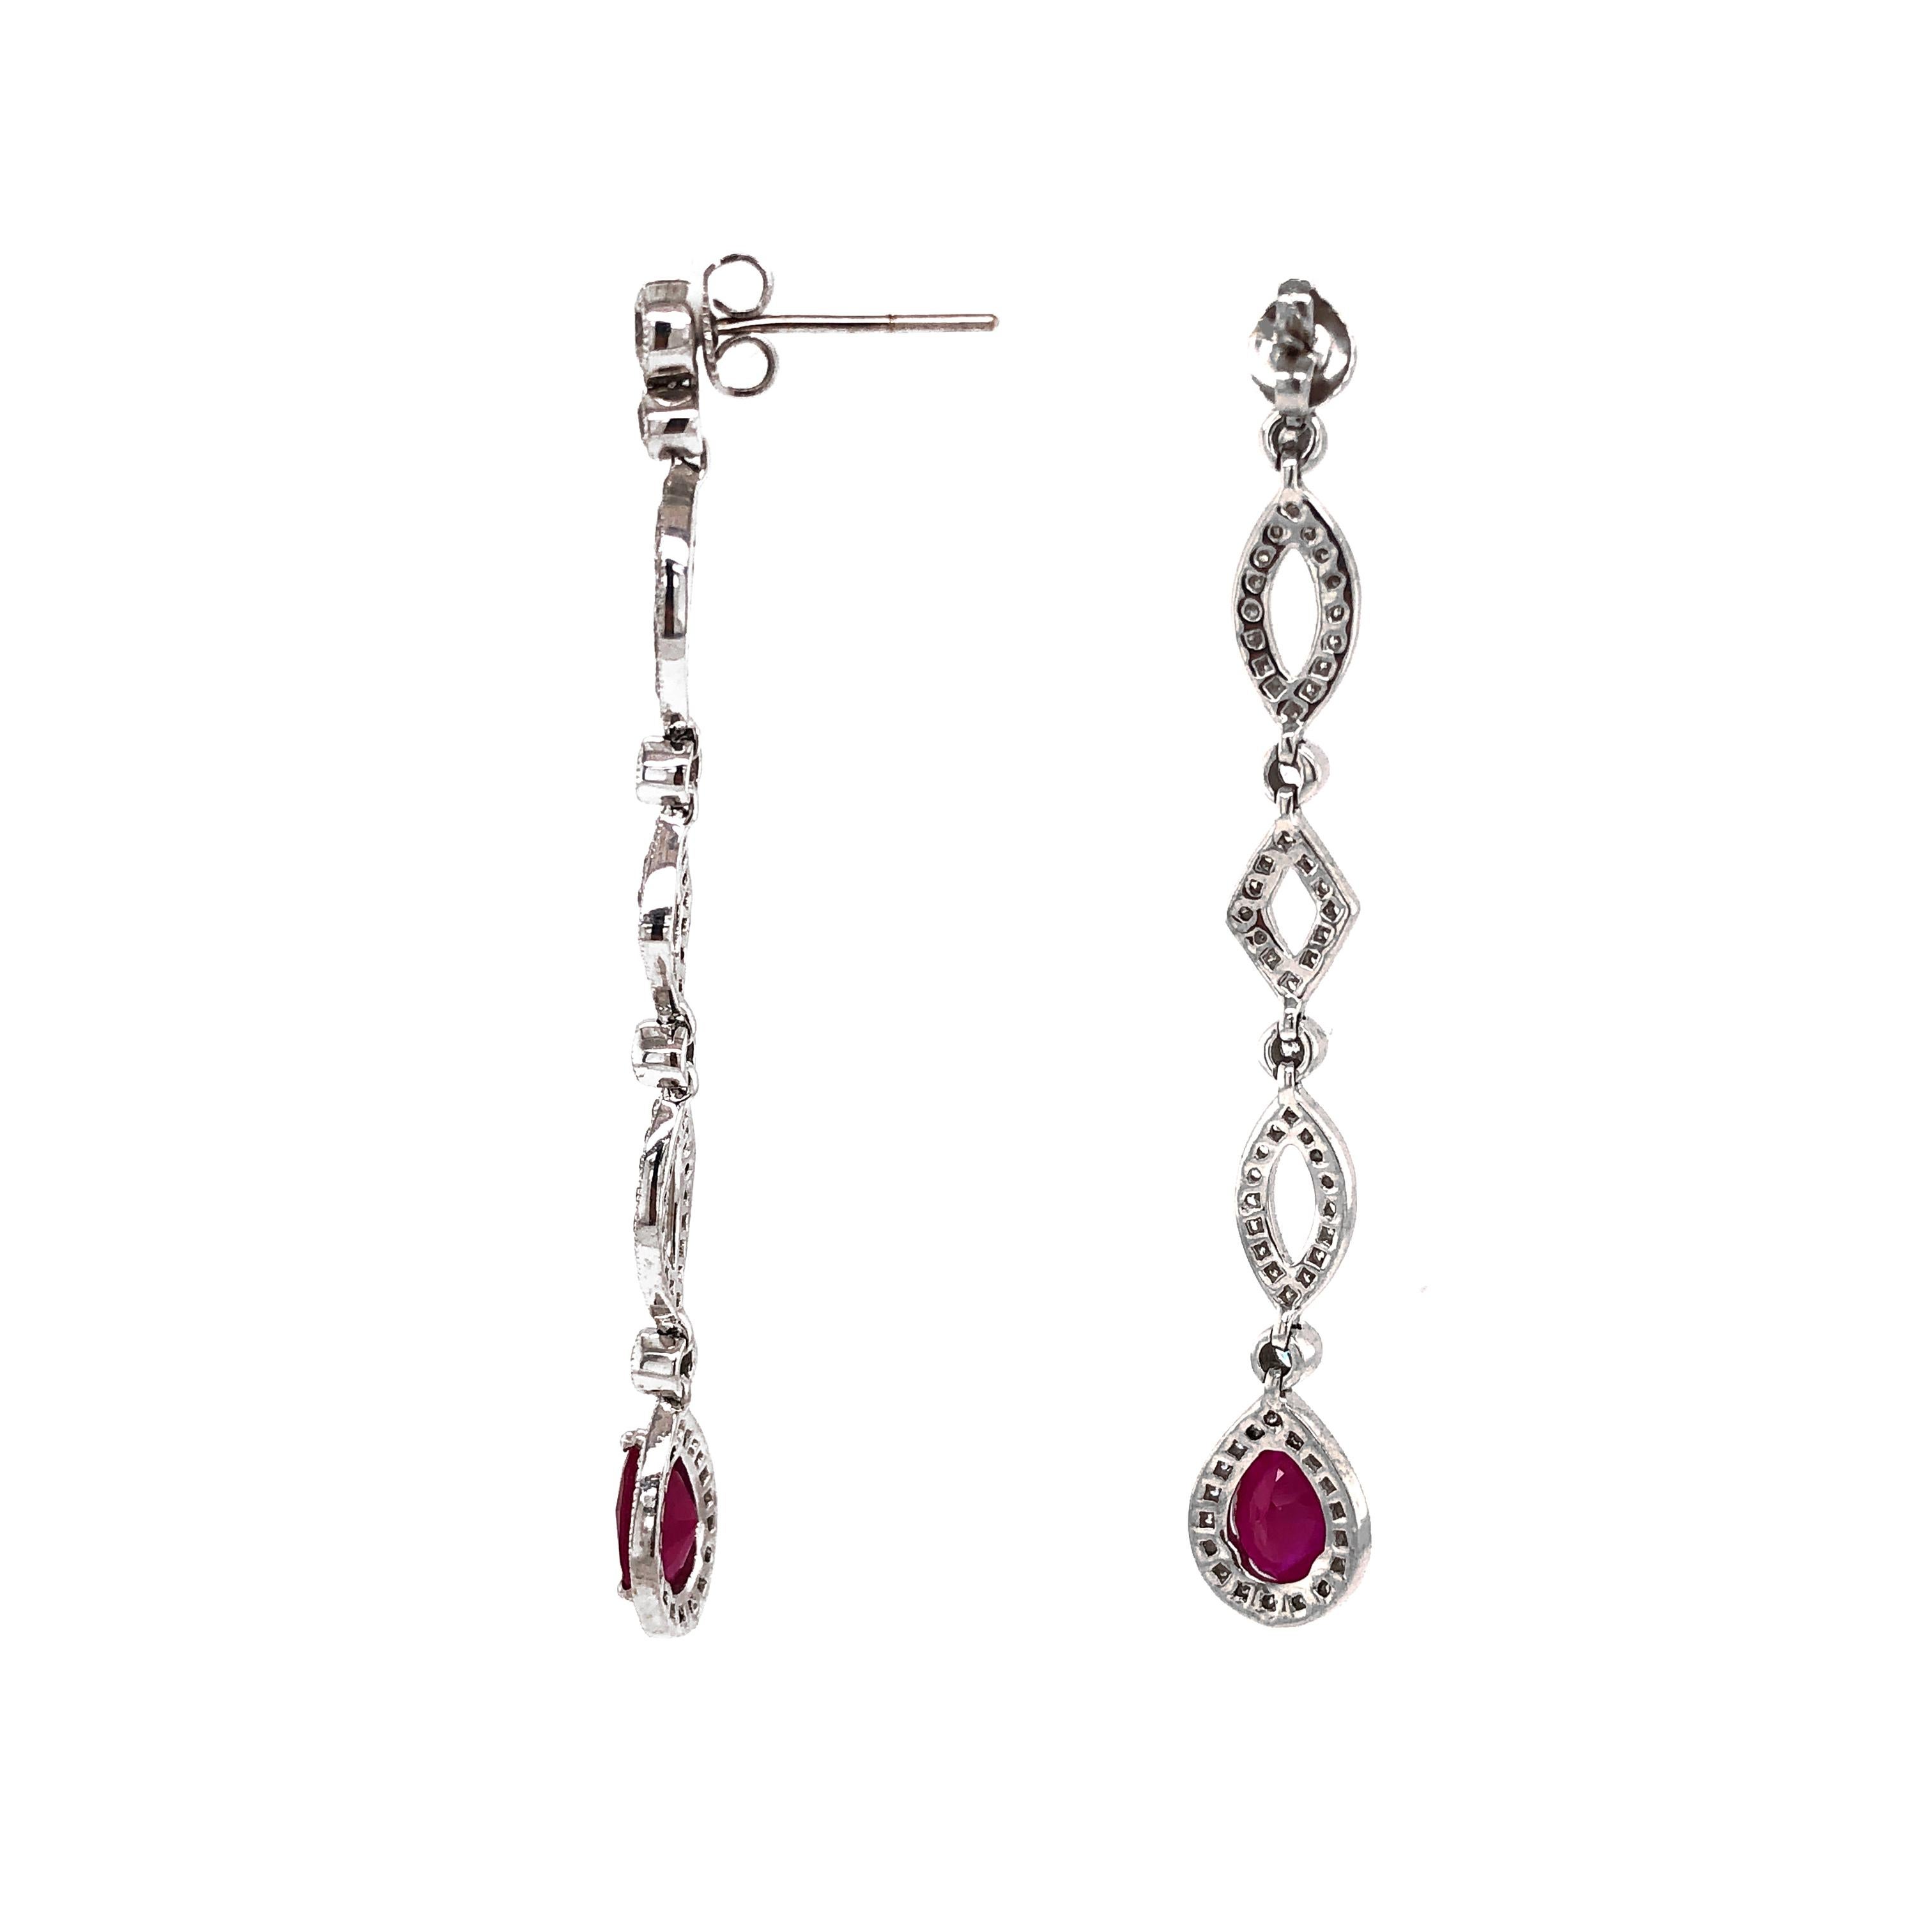 Simple and elegant platinum dangling earrings with center Burmese ruby stones of 3.84 carat in total.
Accented by round diamonds 2.61 carat in total.
Diamonds are natural and white in G-H Color Clarity VS.
Platinum 950 metal.
Butterfly studs.
Width: